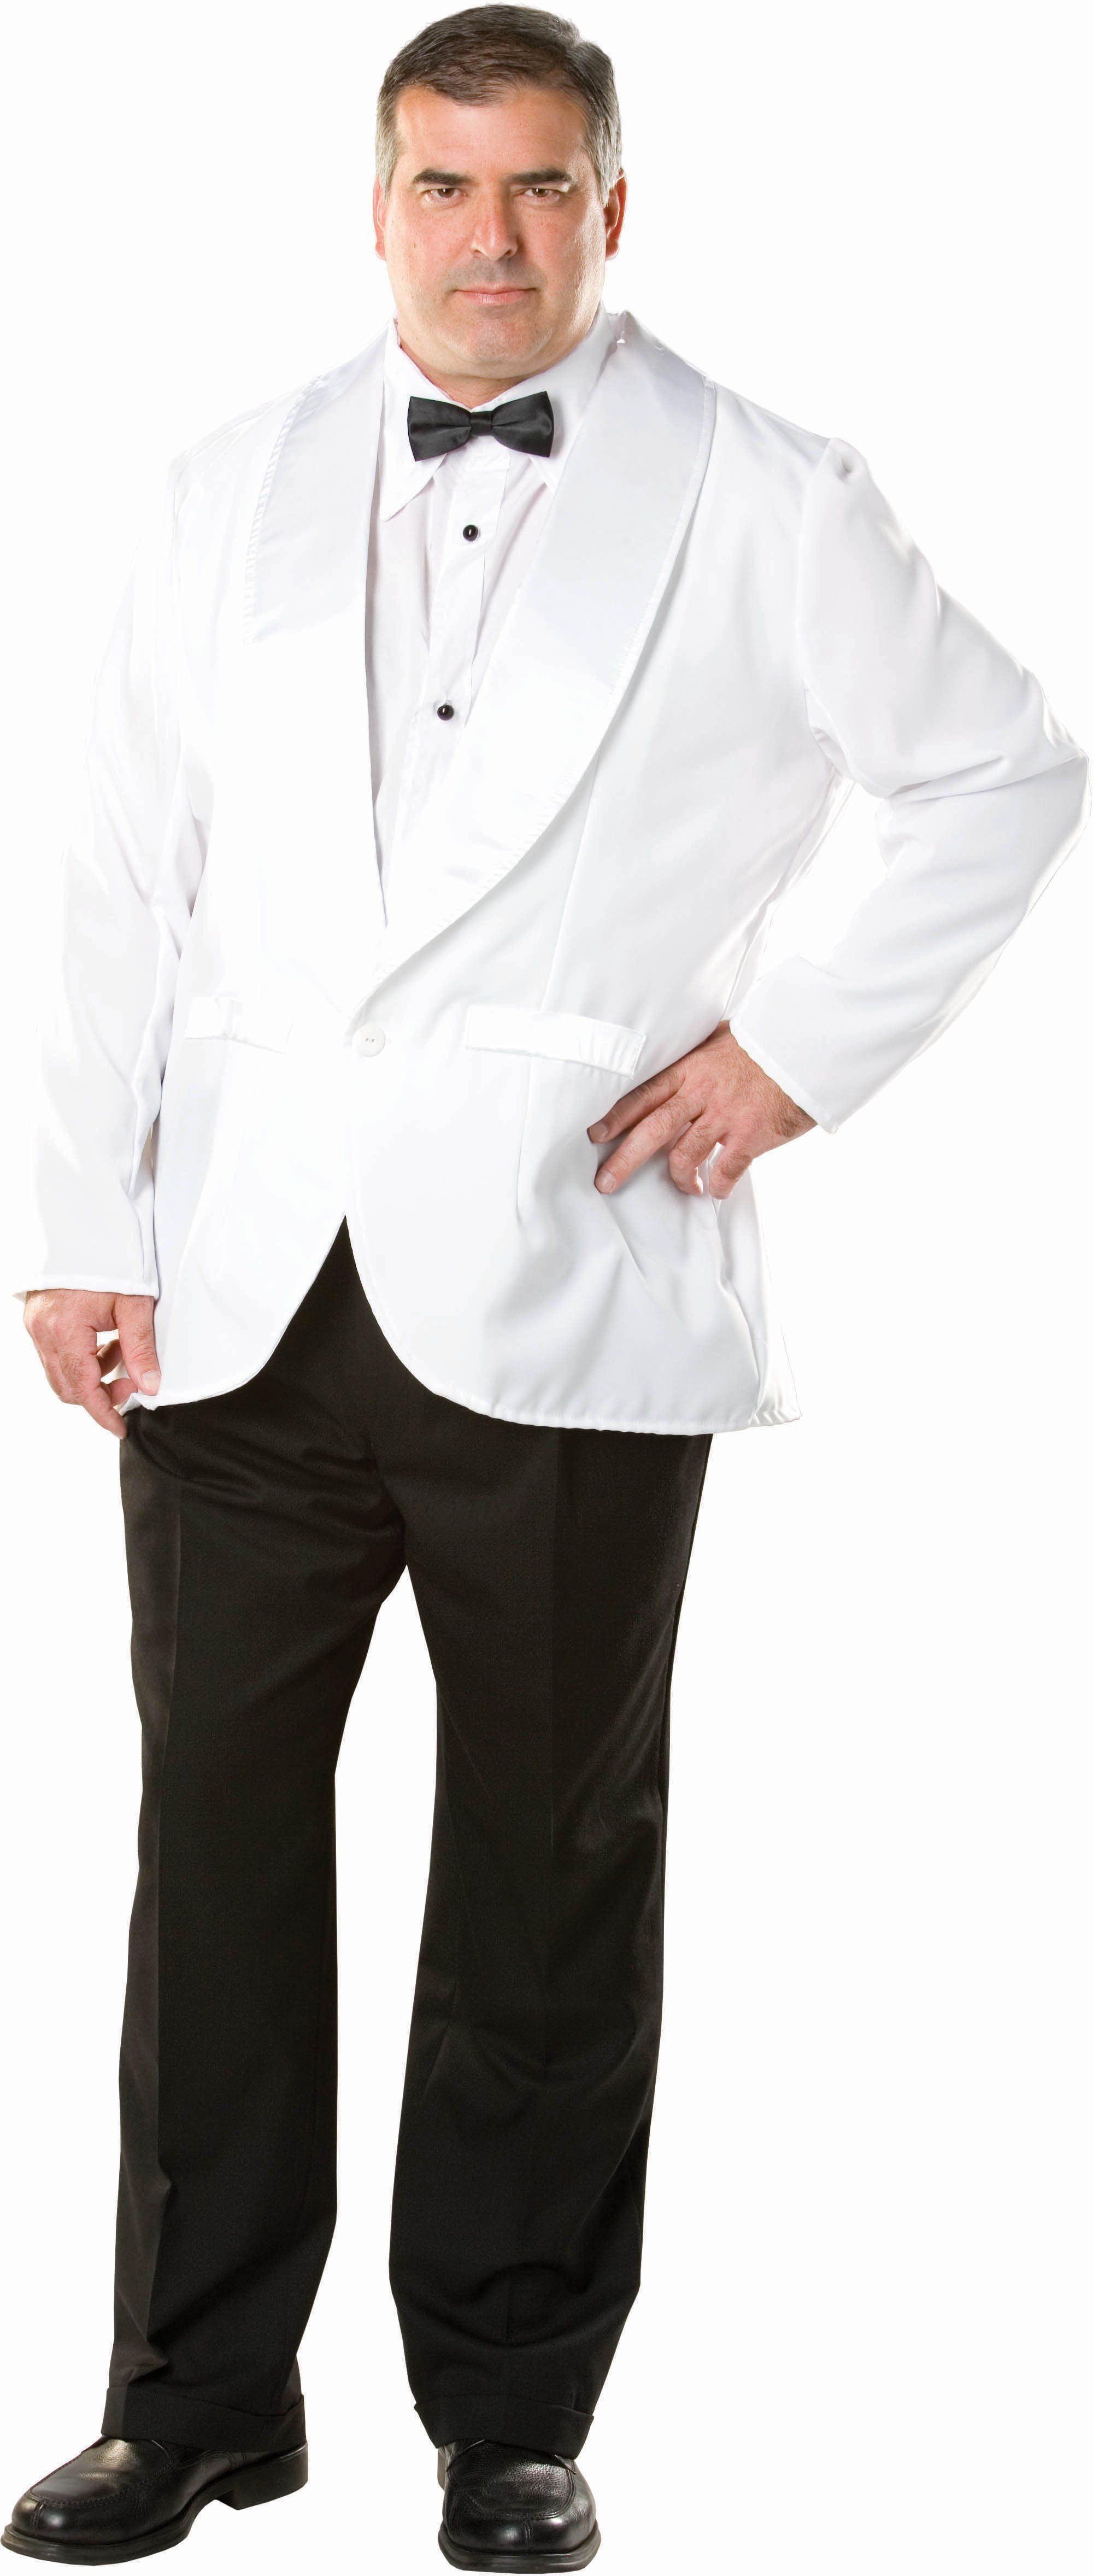 White Dinner Jacket Adult Plus Costume - DO NOT ACTIVATE - Click Image to Close